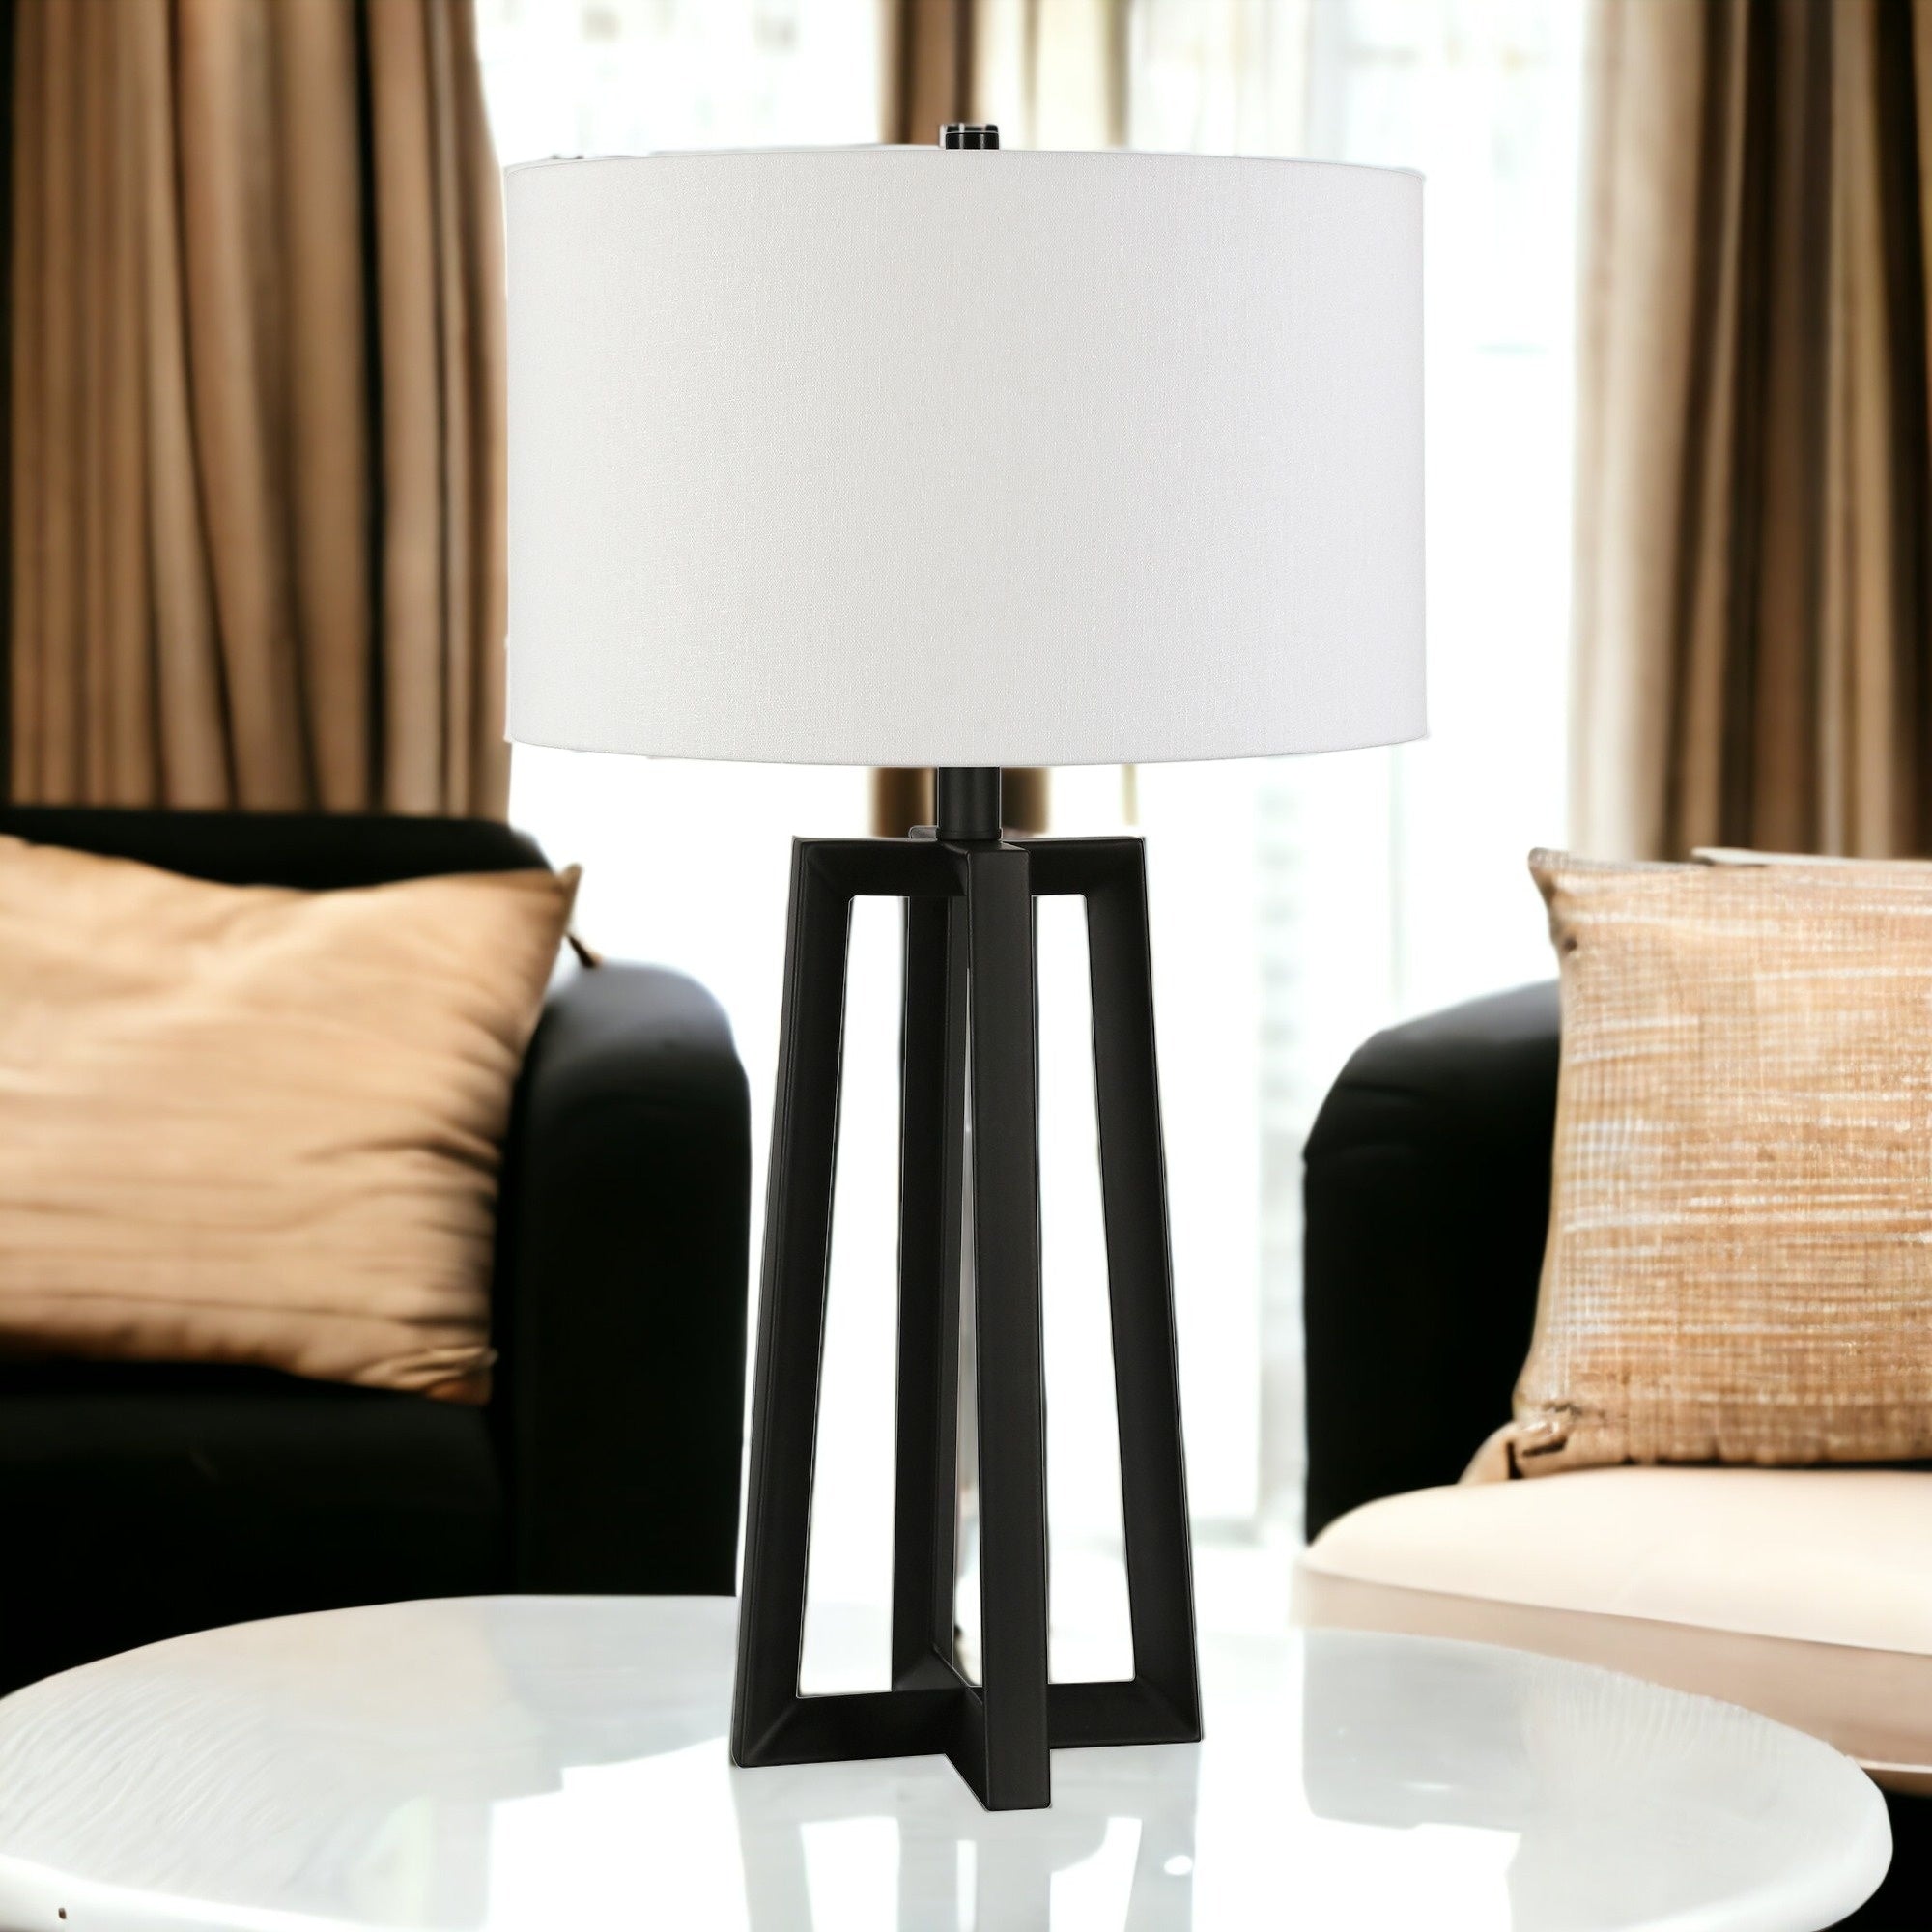 24" Black and White Metal Table Lamp With White Drum Shade